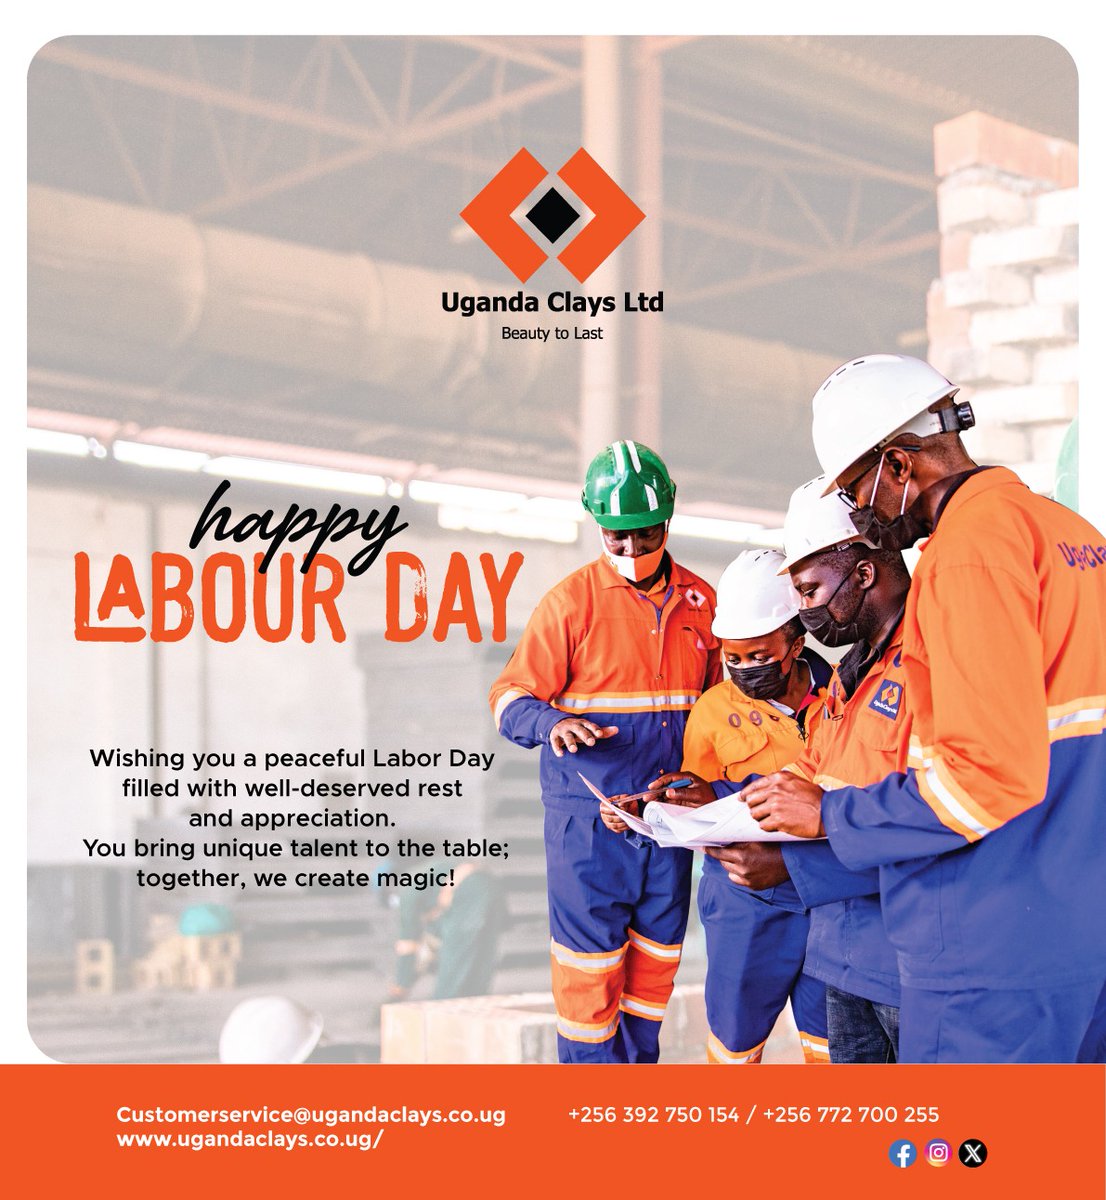 Wishing you a peaceful and rewarding Labour Day filled with appreciation for your invaluable contributions to society.